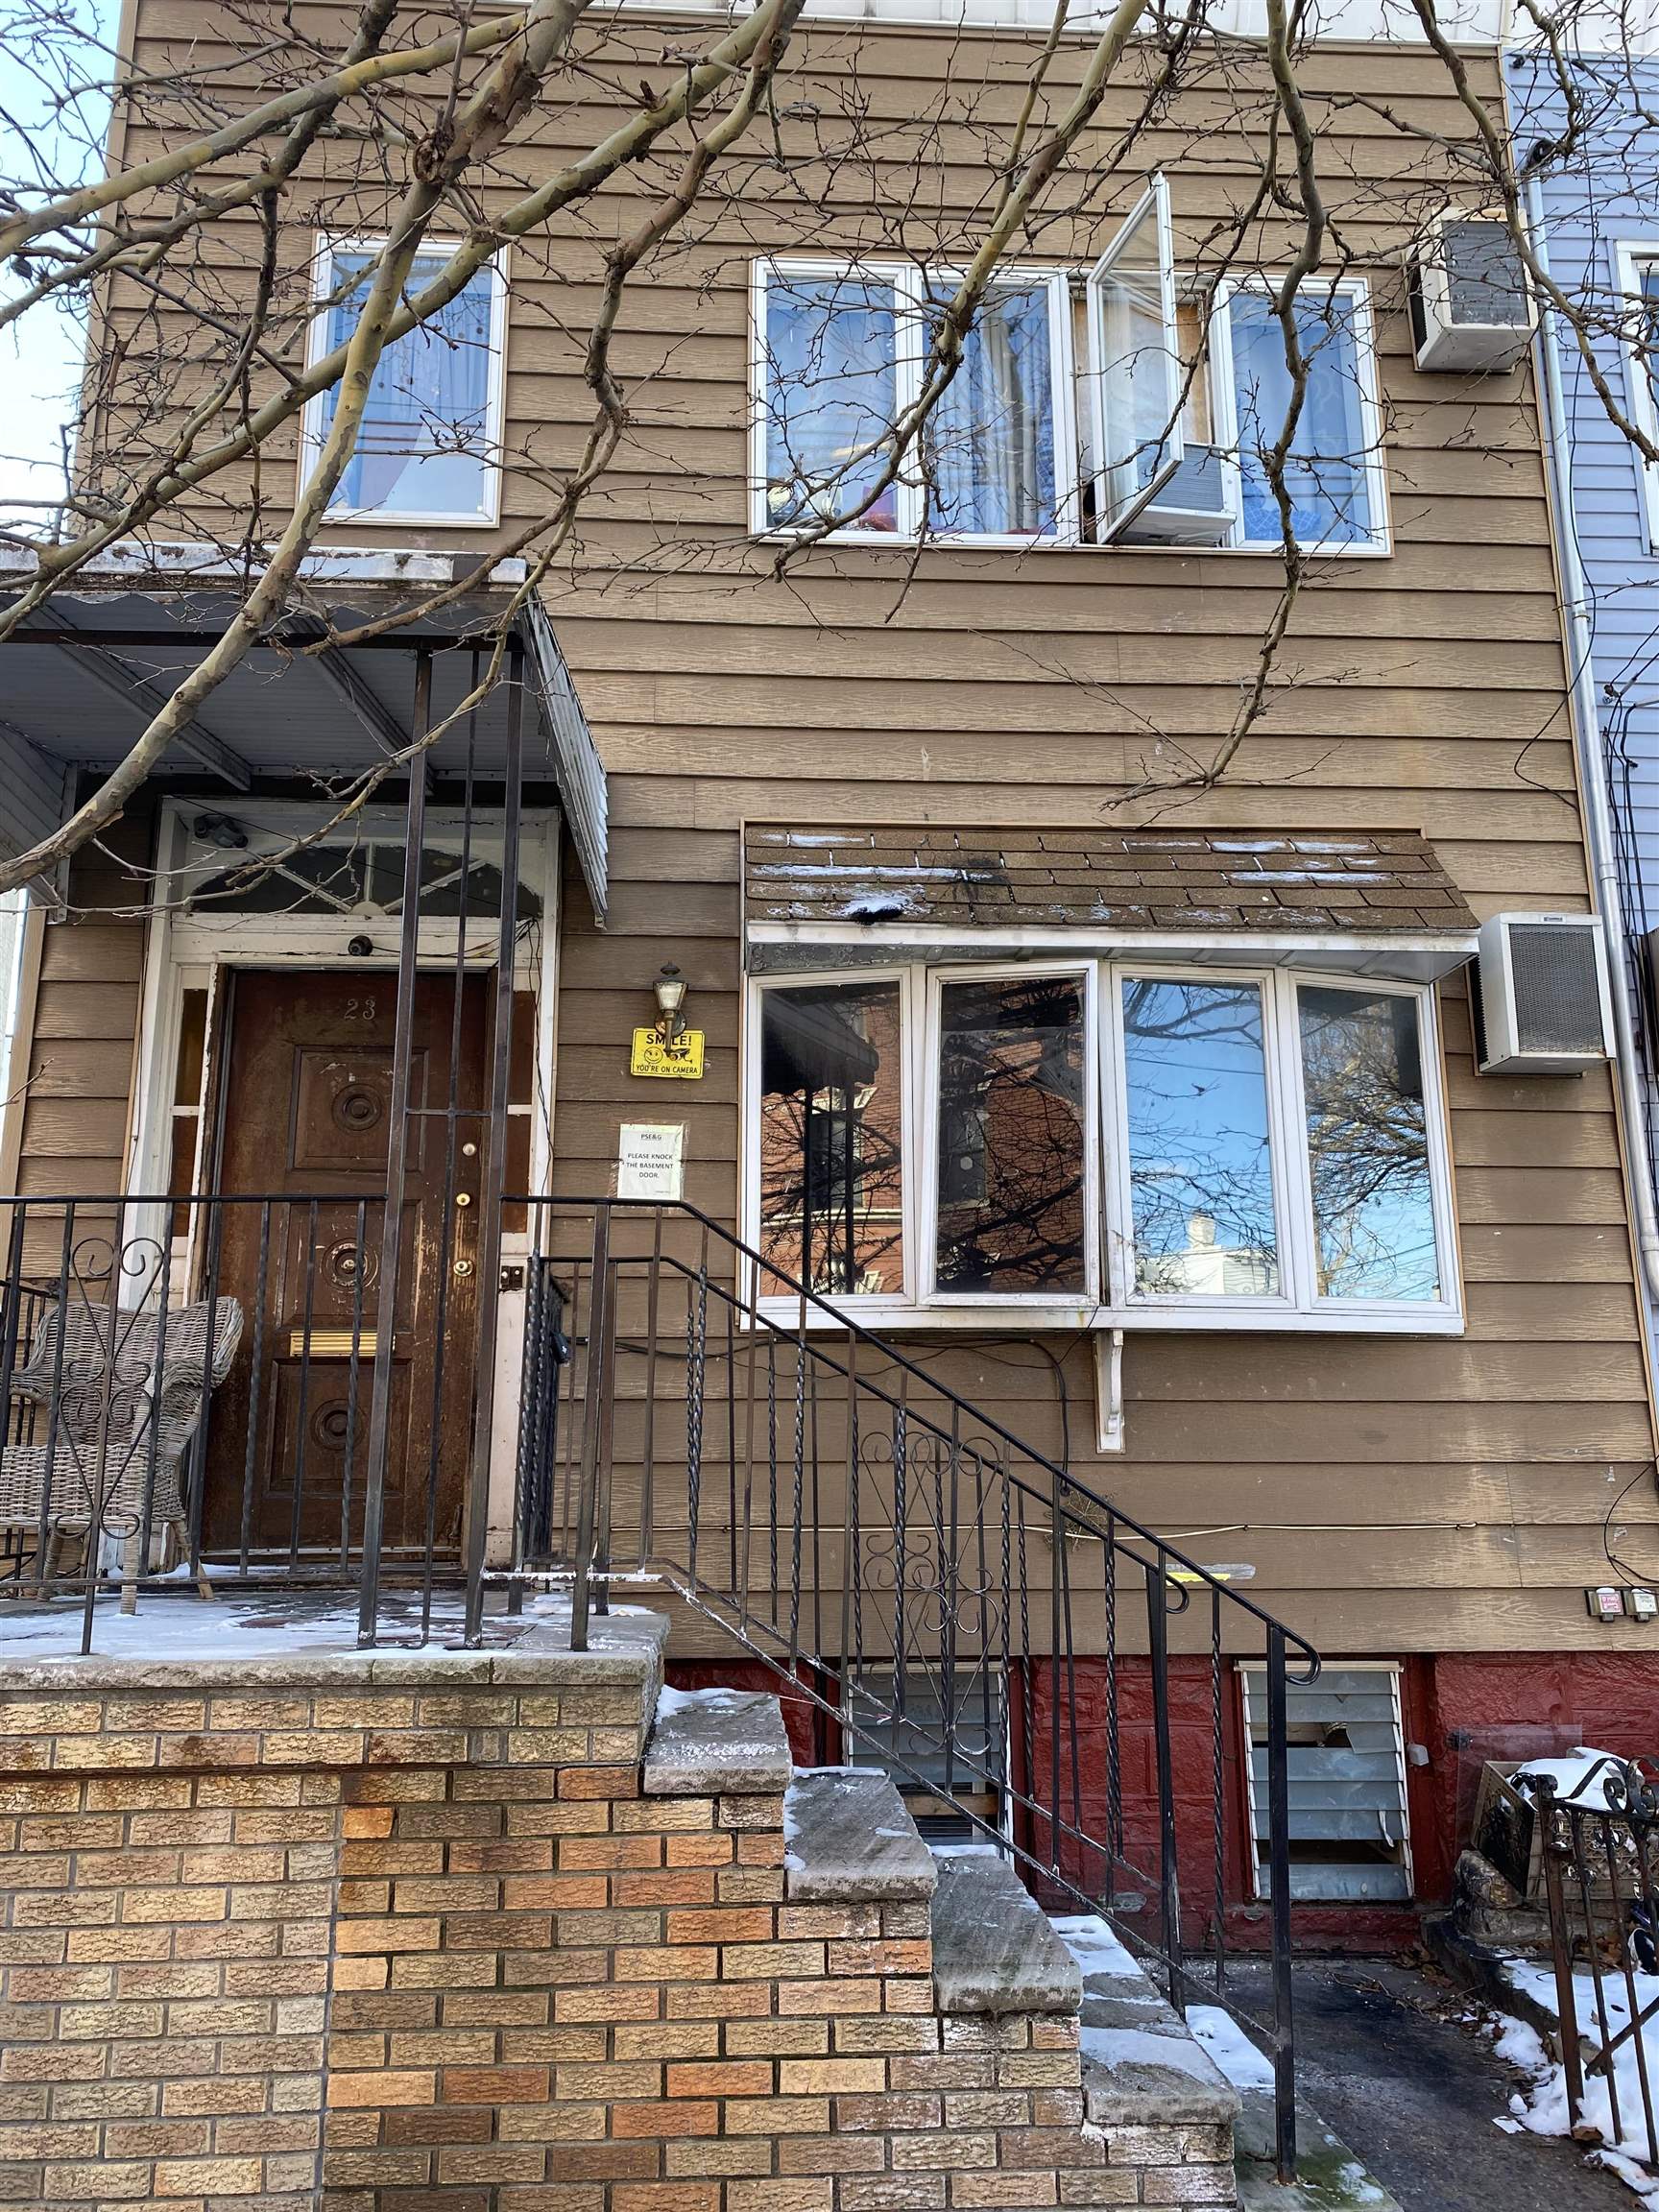 # 240001436 - For Rent in JERSEY CITY - Heights NJ